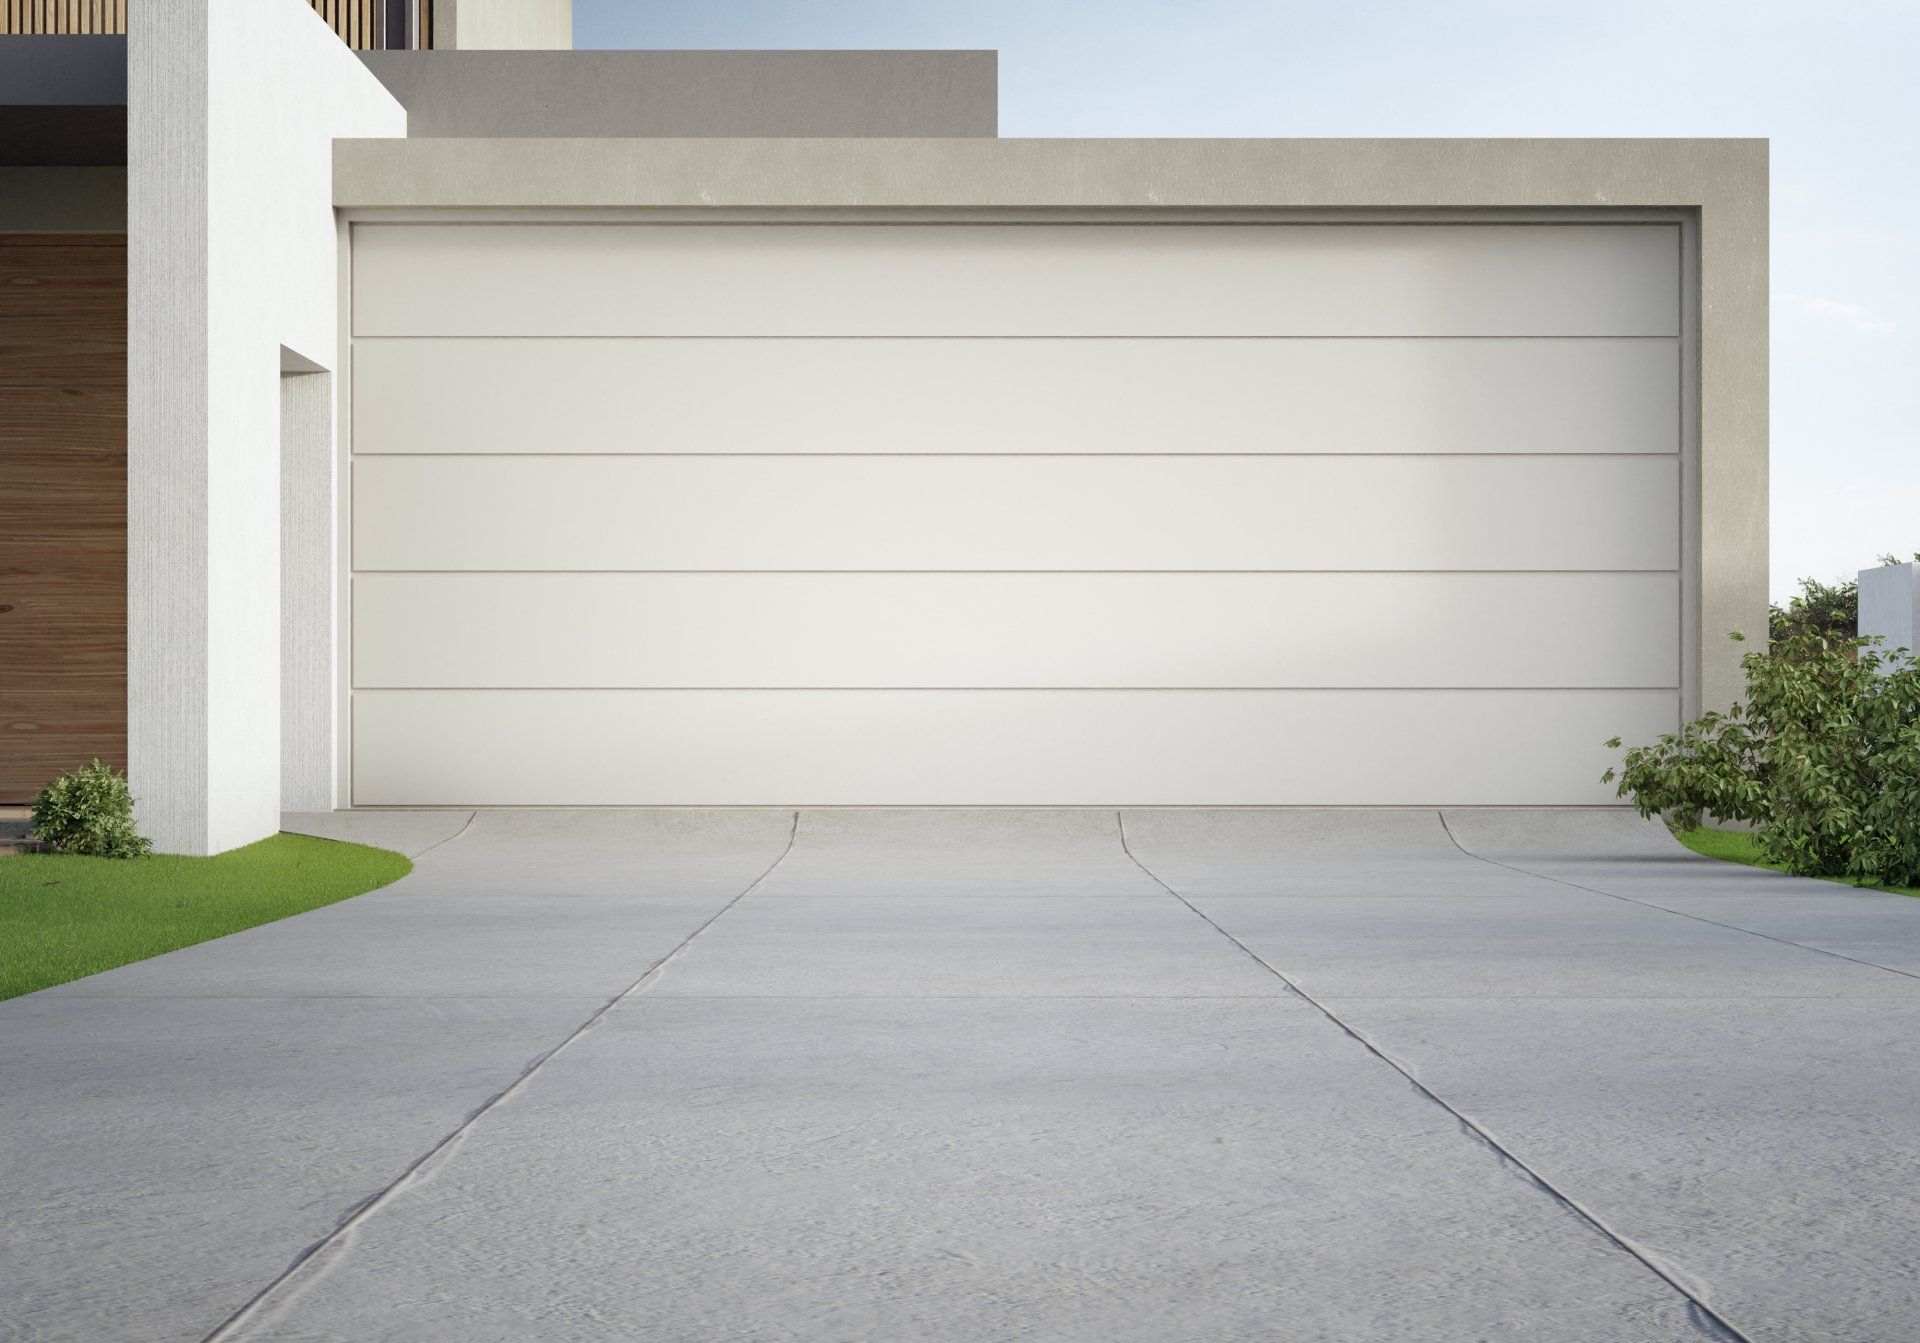 Concrete slab driveway in front of a white garage door.